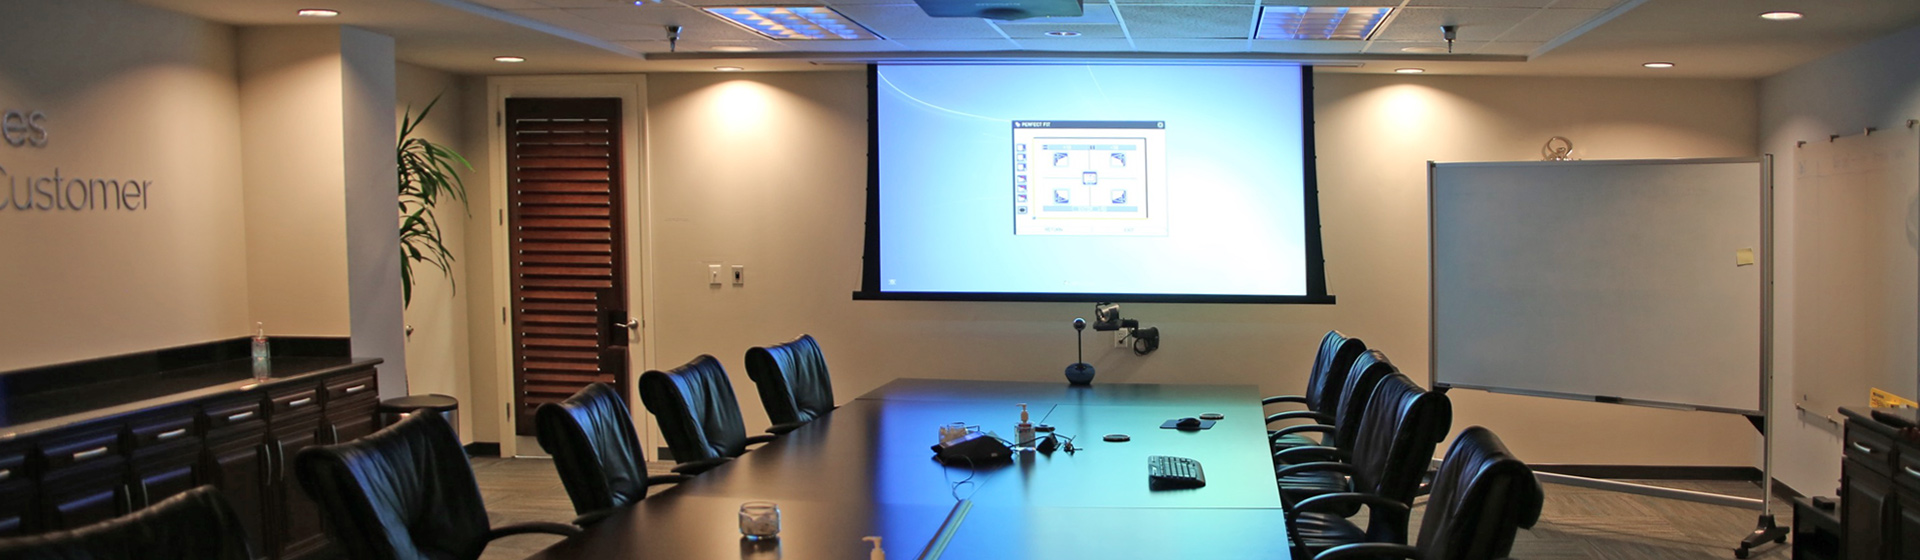 projection tv installation for conference room tampa 